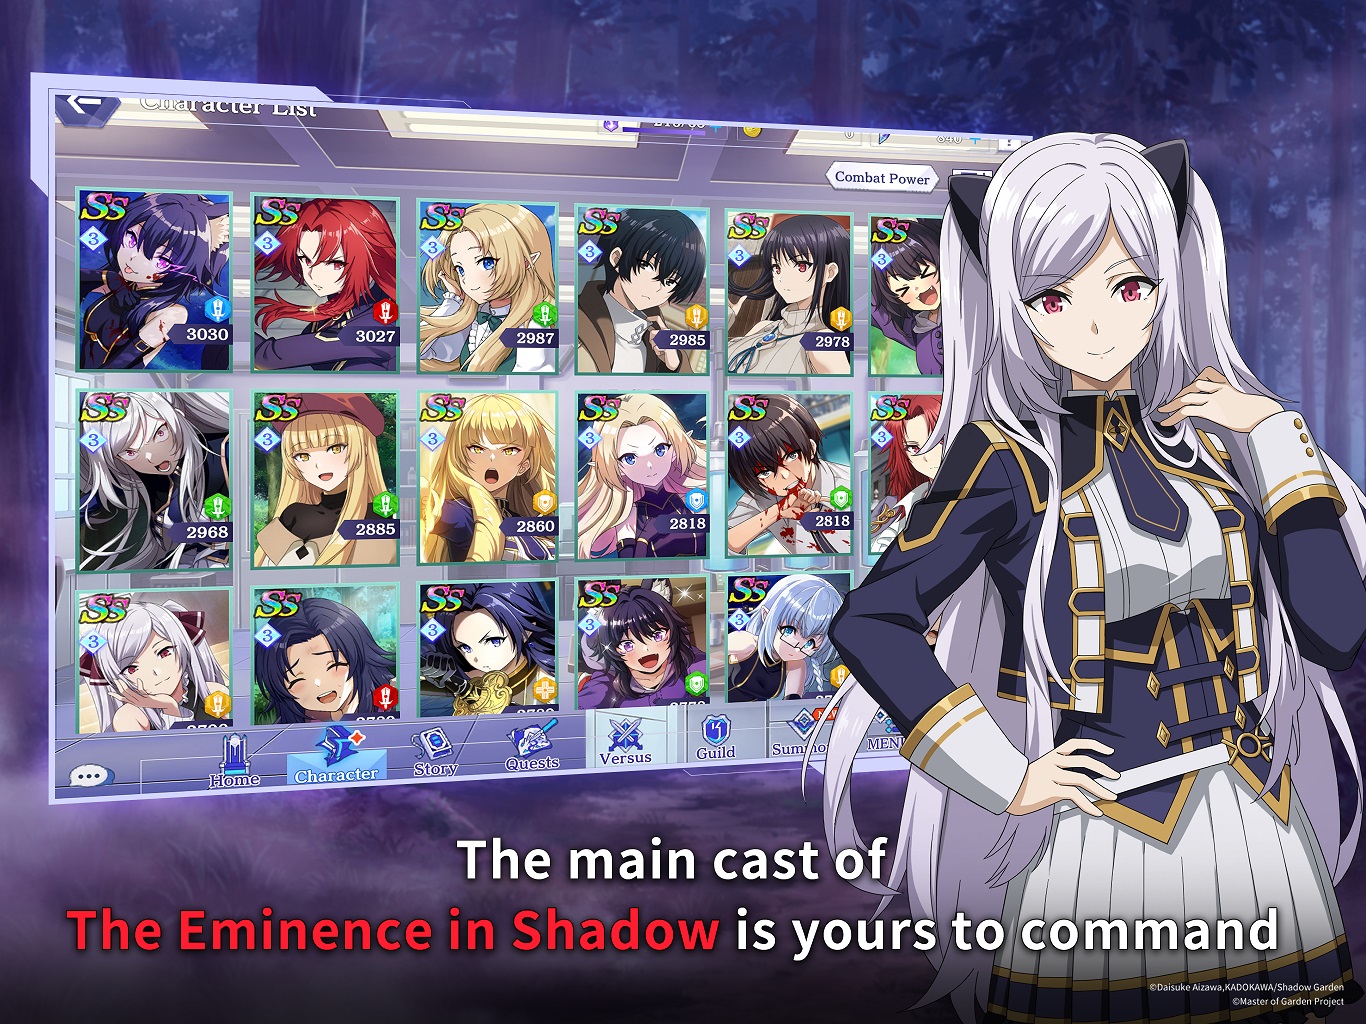 The Eminence In Shadow Anime Release Date, Cast, Key Visuals & More Updates!